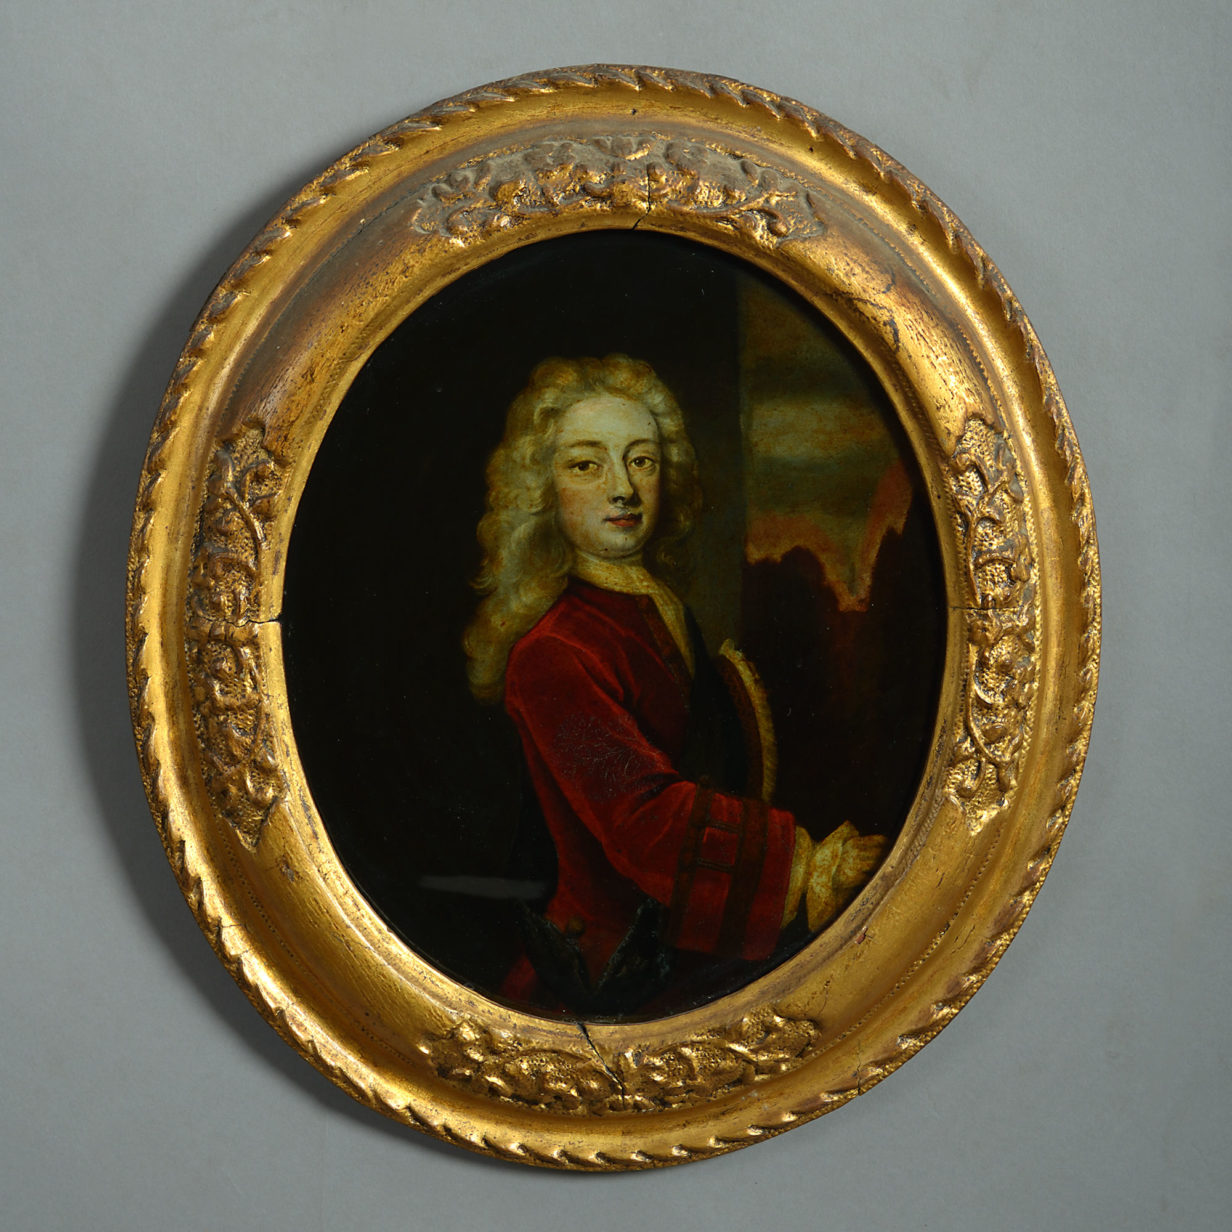 Early 18th century reverse glass print - oval portrait of a gentleman